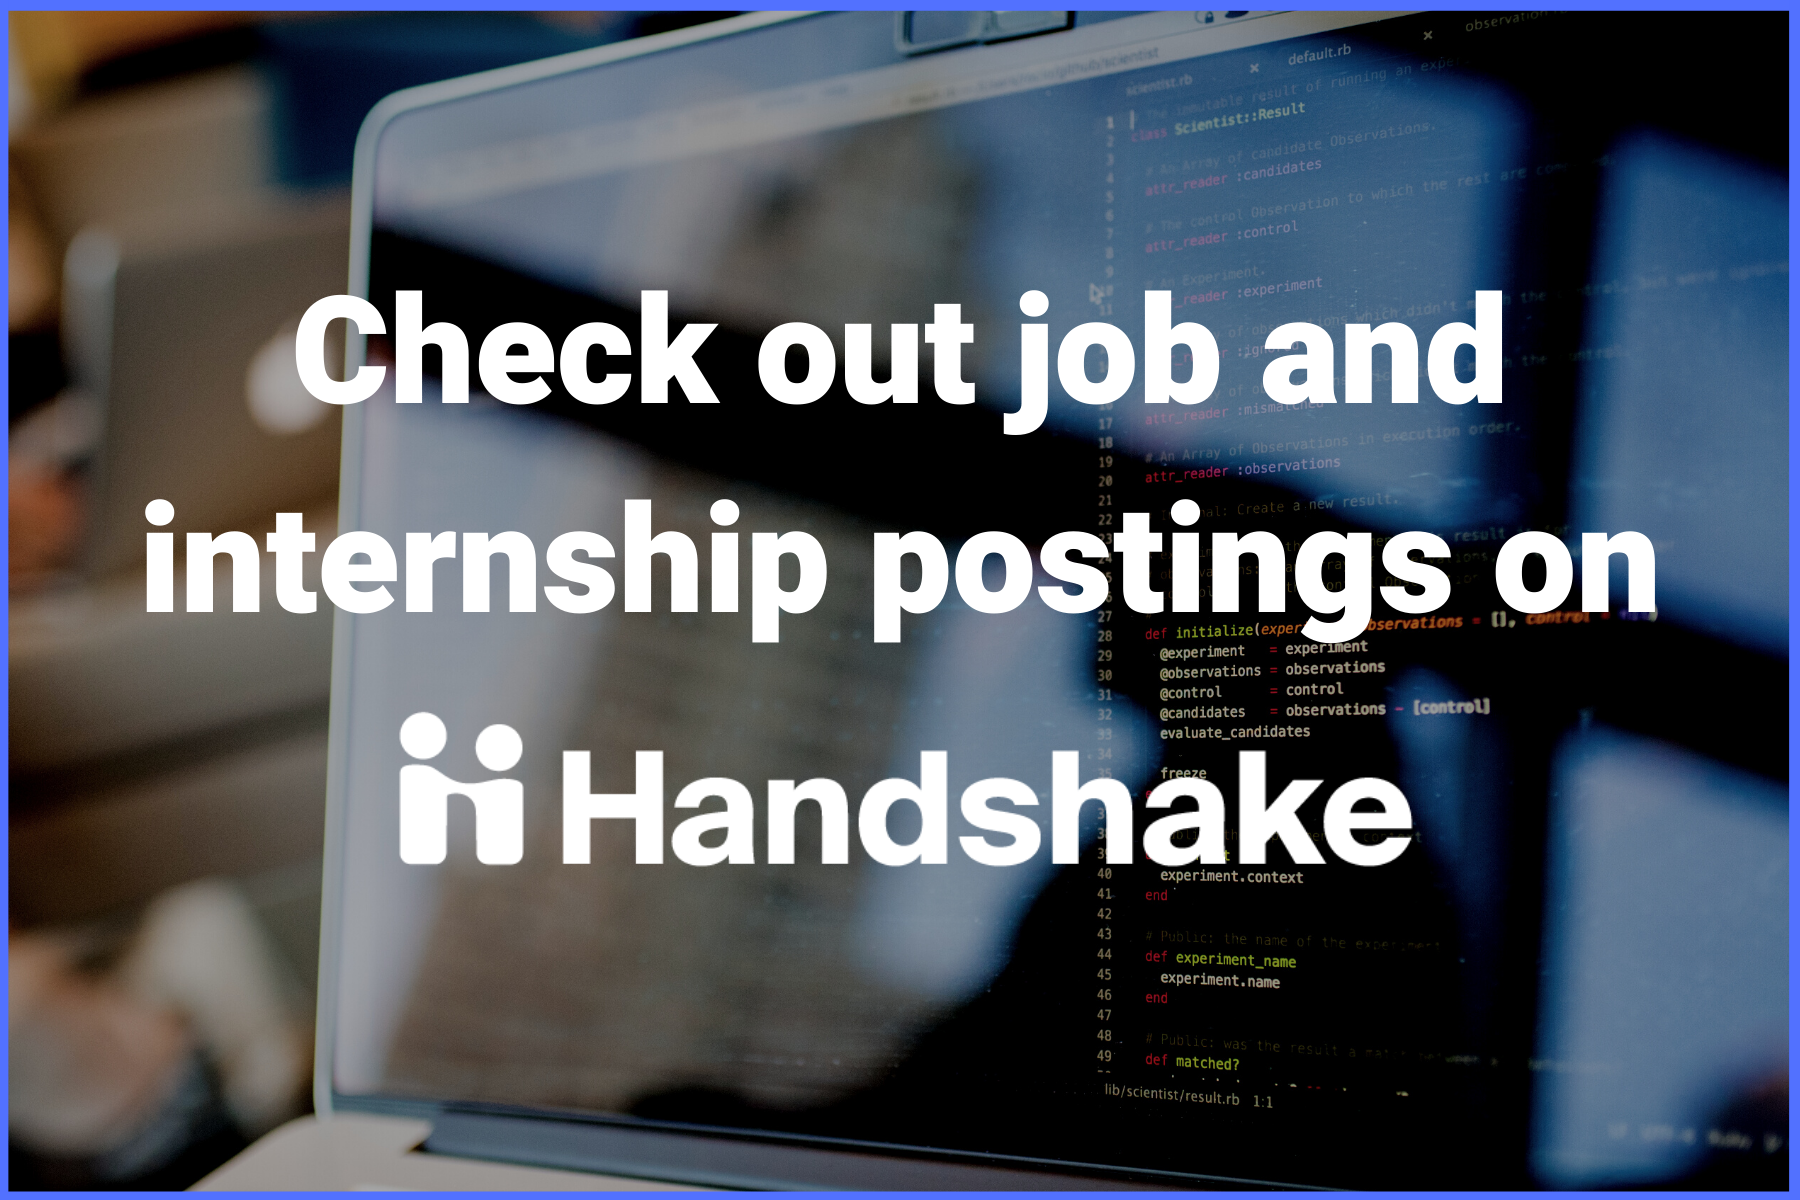 Find opportunities in computer science and information technology on Handshake